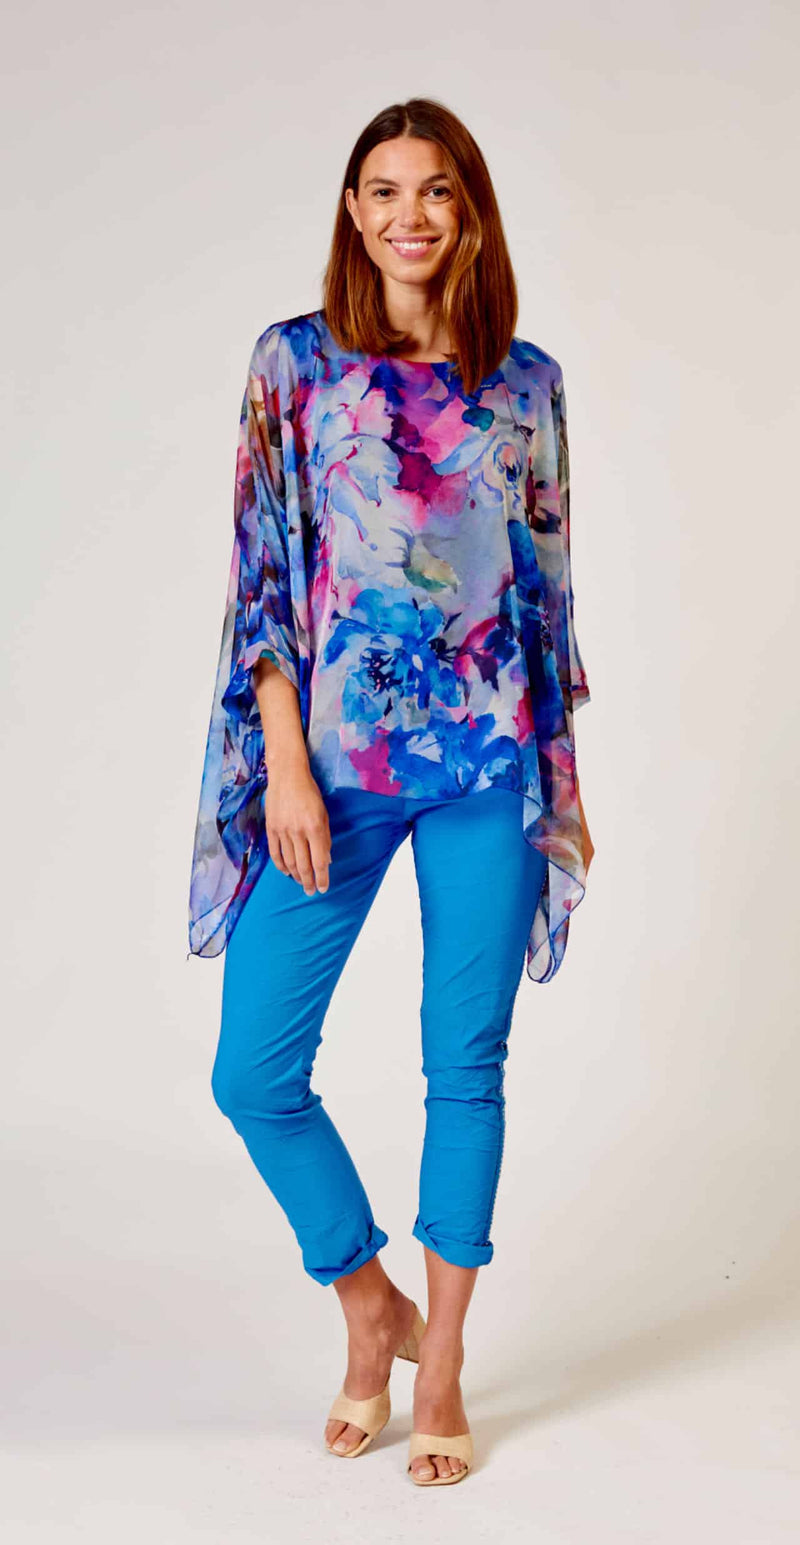 L'amore Chiffon Kaftan Top in Blue and Pink Floral